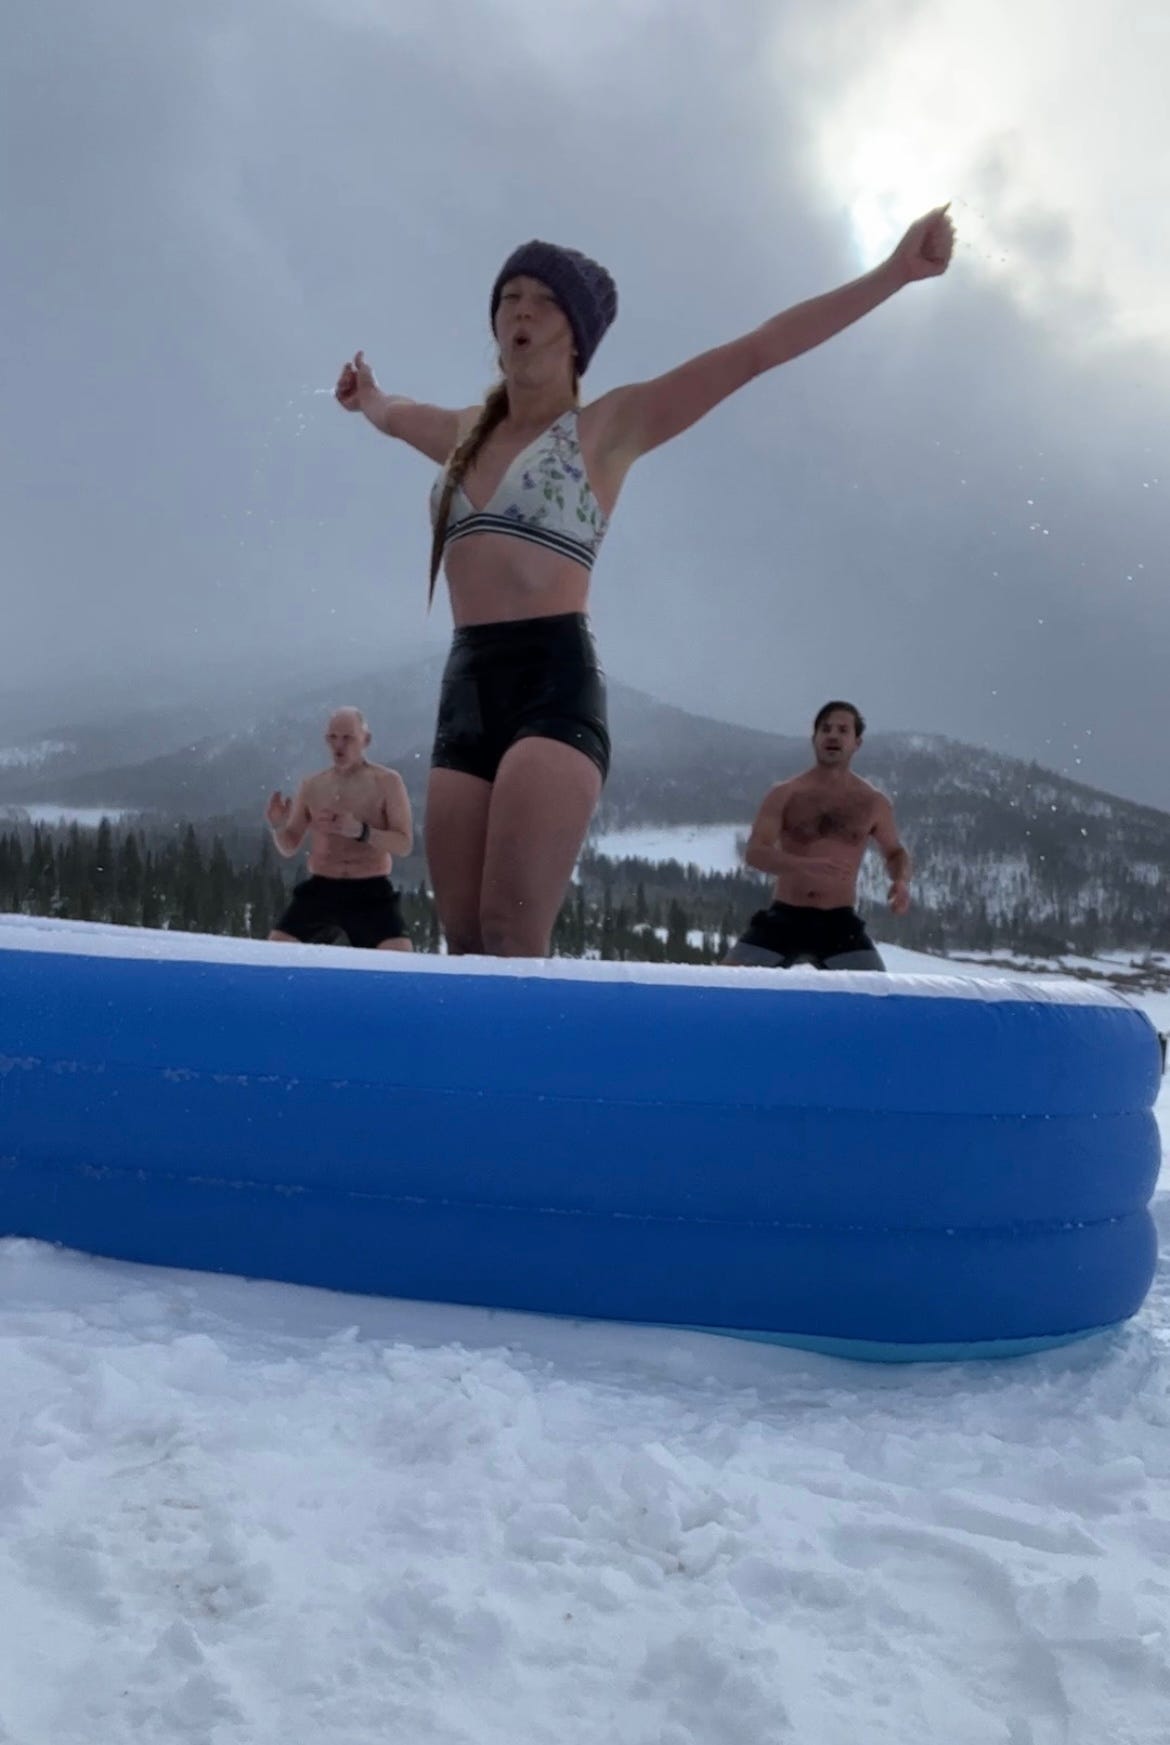 Lisa coming out of ice bath, mountains in background, men doing exercises to keep themselves warm in background